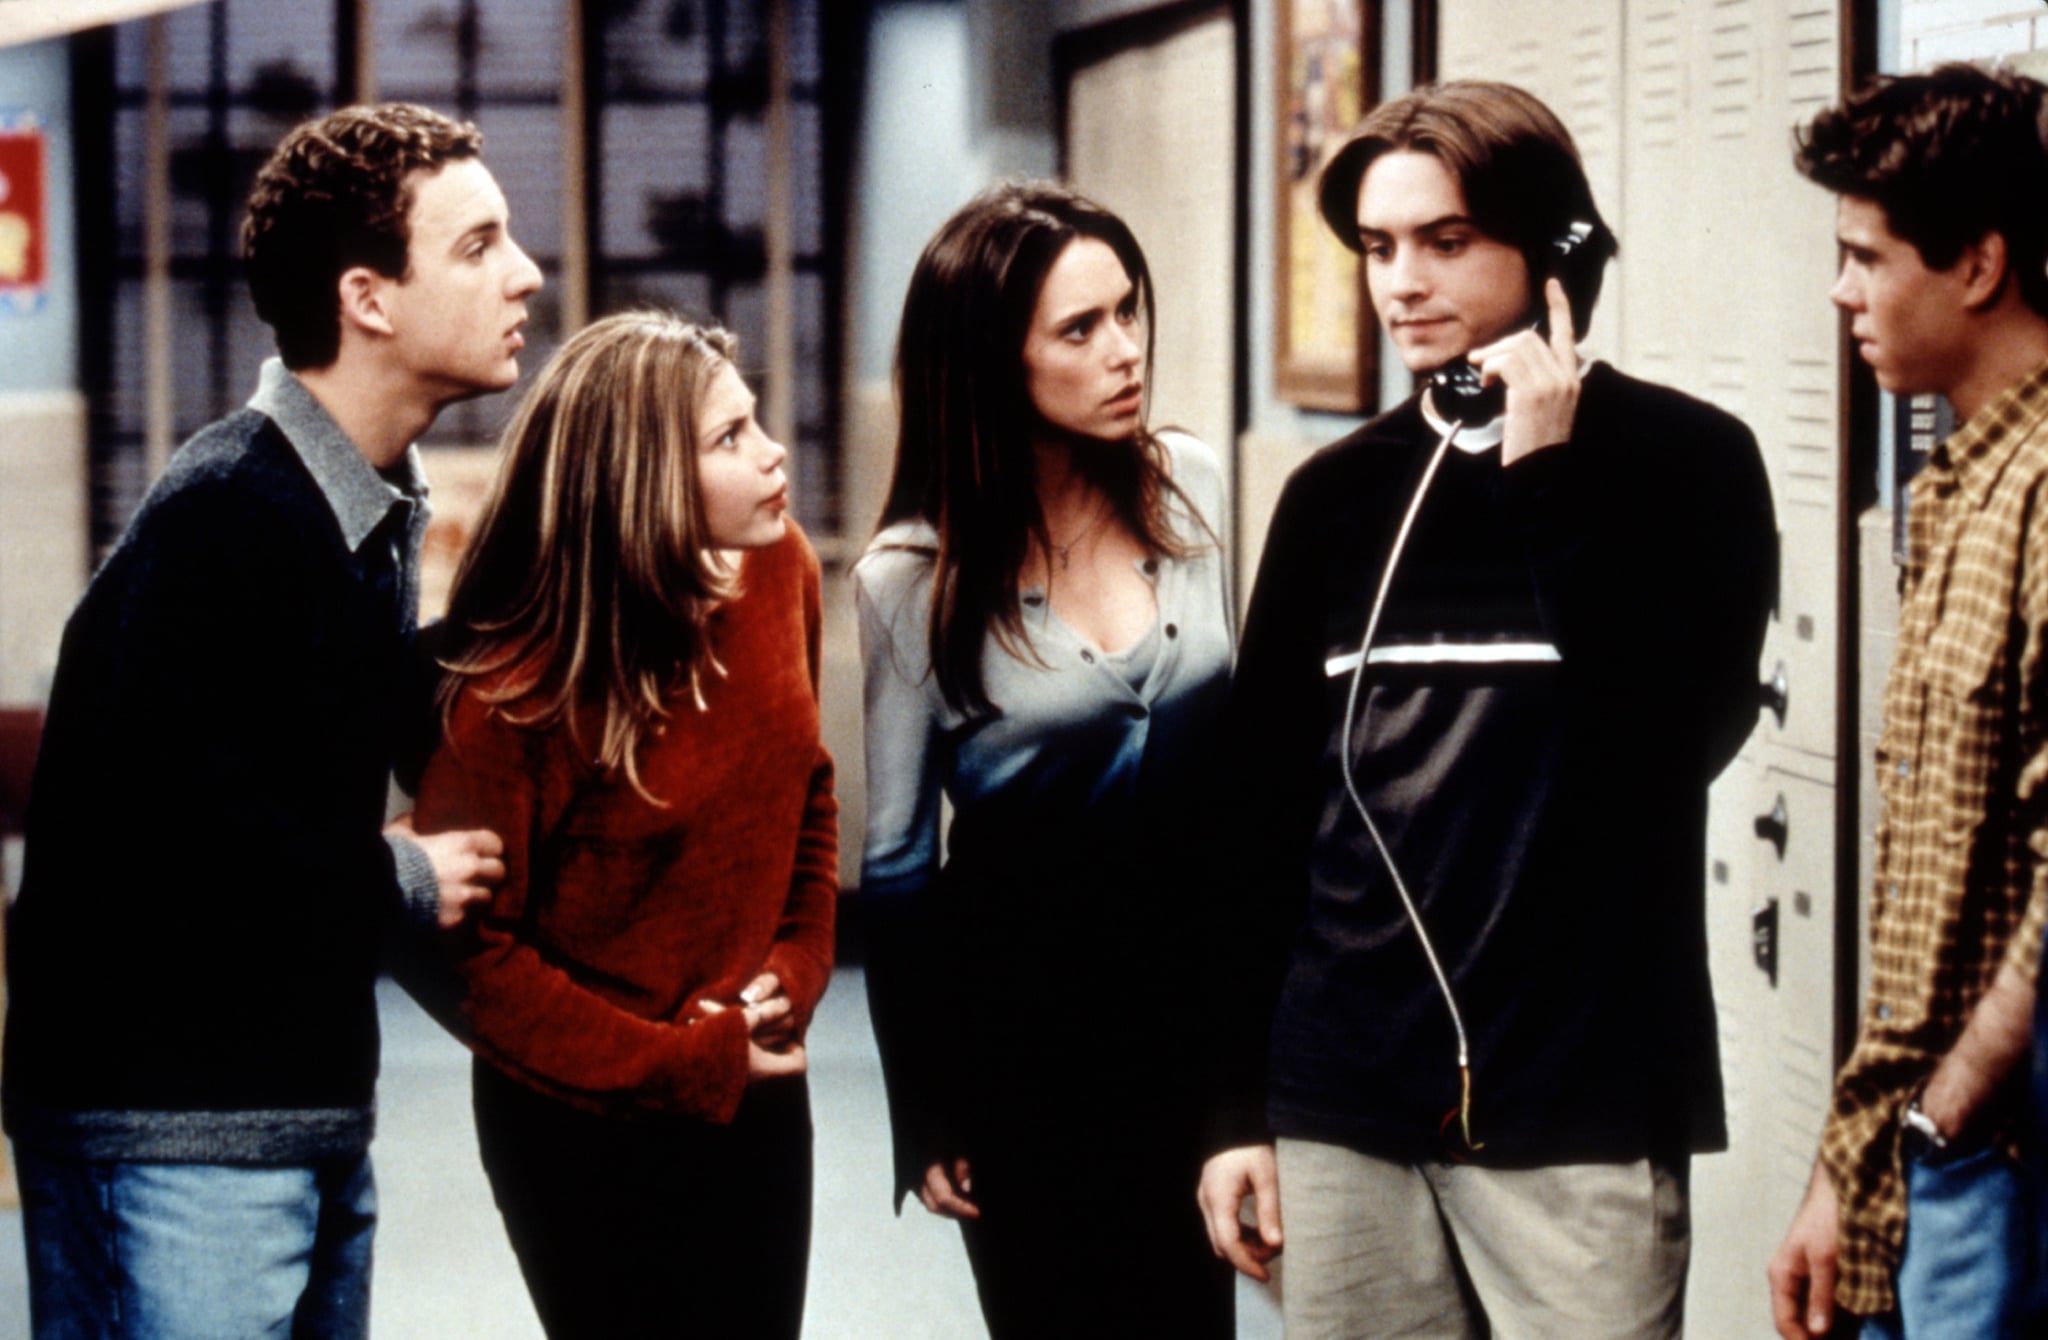 BOY MEETS WORLD, Ben Savage, Danielle Fishel, Jennifer Love Hewitt, Will Friedle, Matthew Lawrence, Season 5, Ep. 'And Then There Was Shawn, 1998. 1993-2000. (c) Buena Vista Television/ Courtesy: Everett Collection.